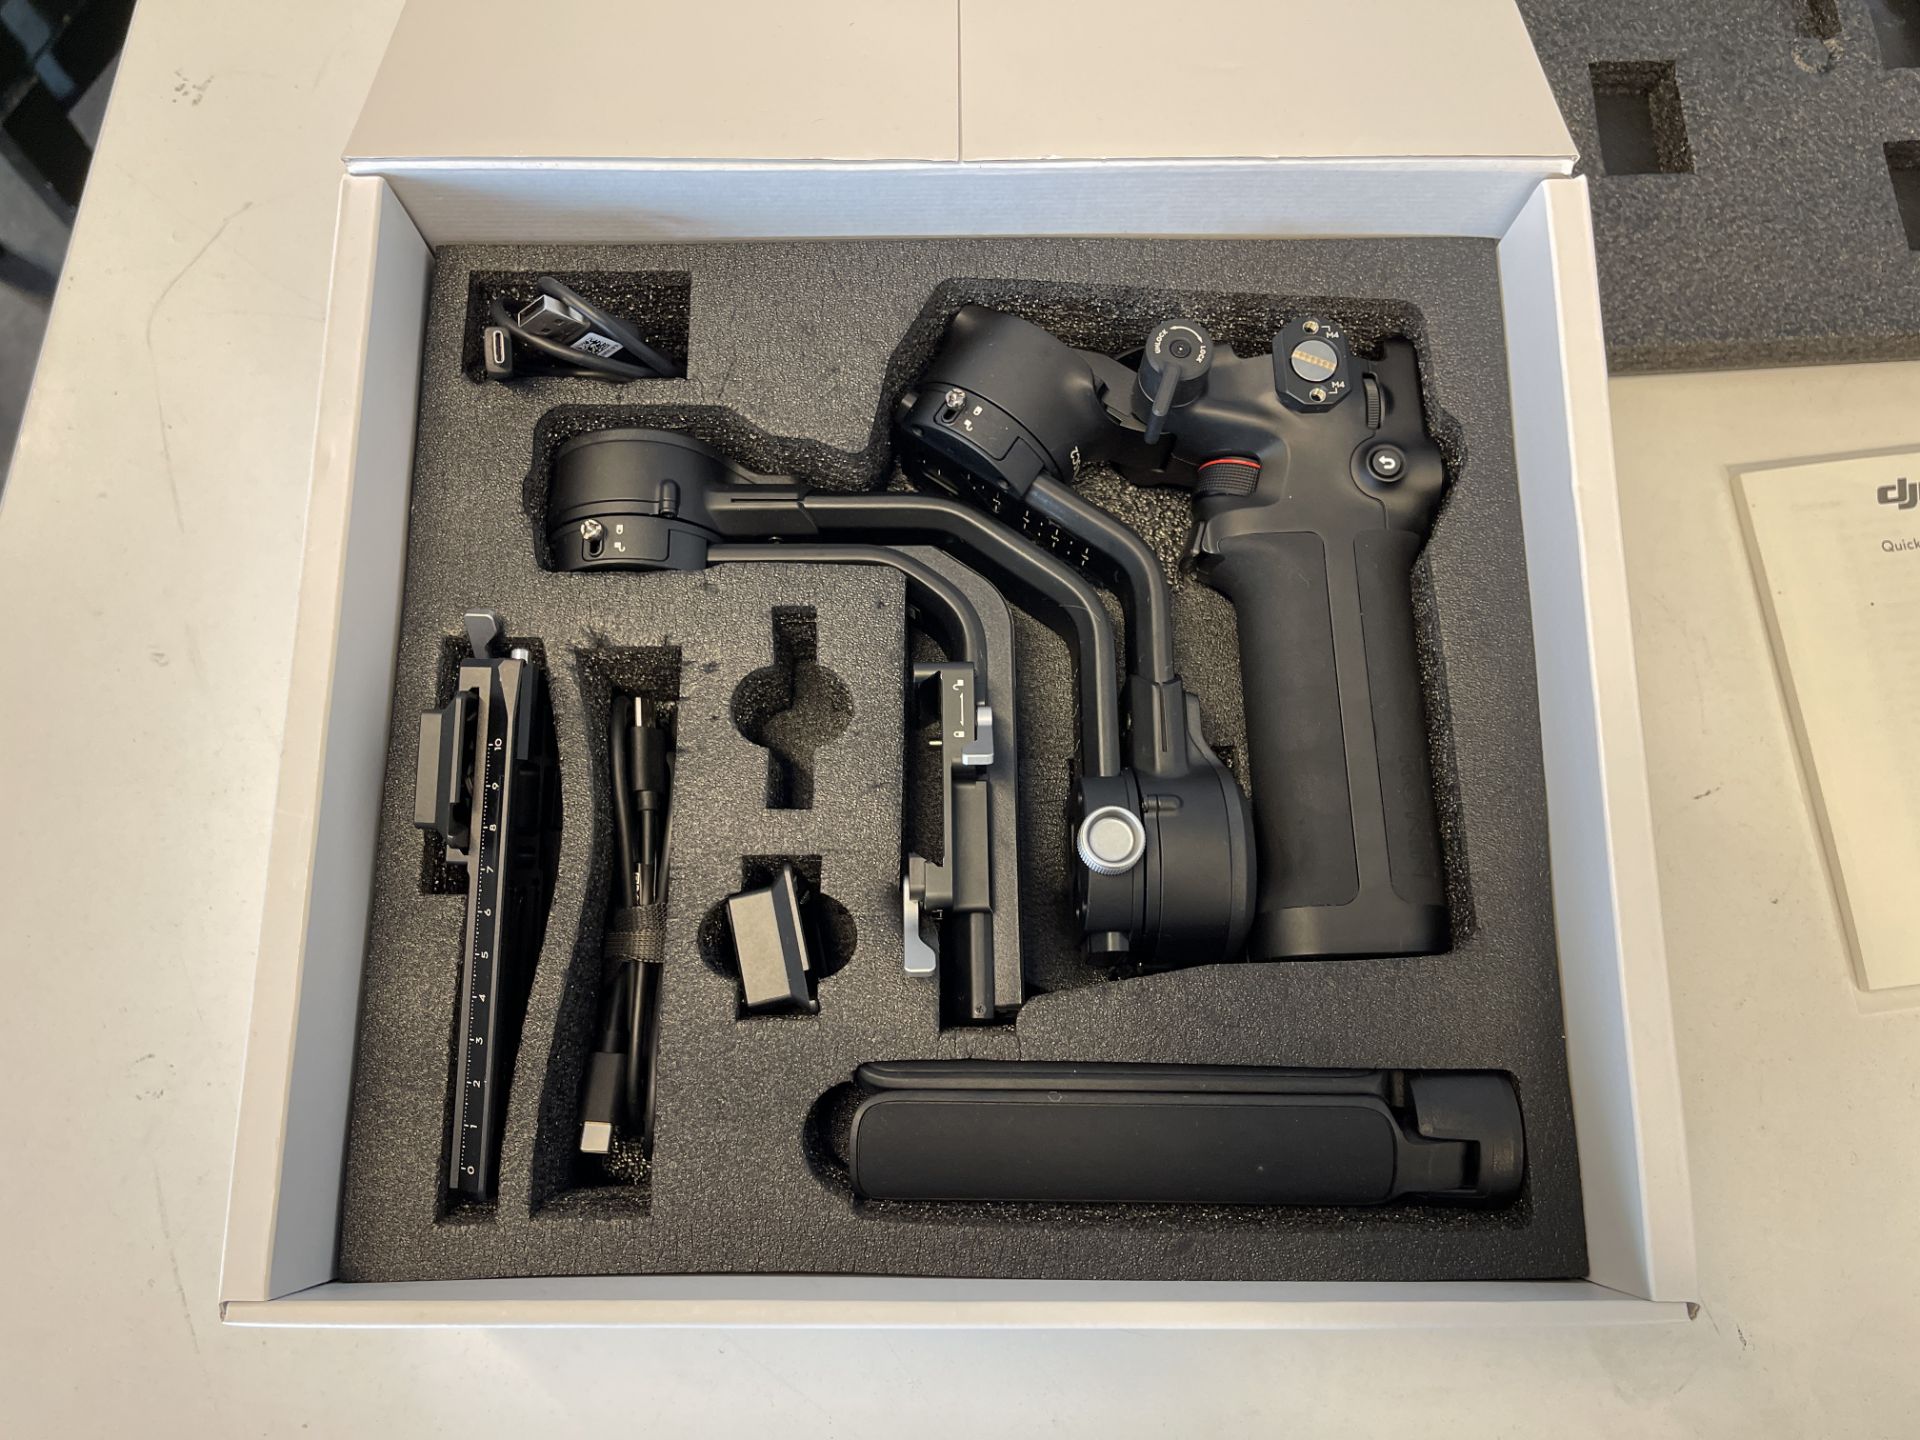 DJI RSC 2 Ronin Handheld Gimble Complete with Accessories & Case (RRP £400) - Image 4 of 9